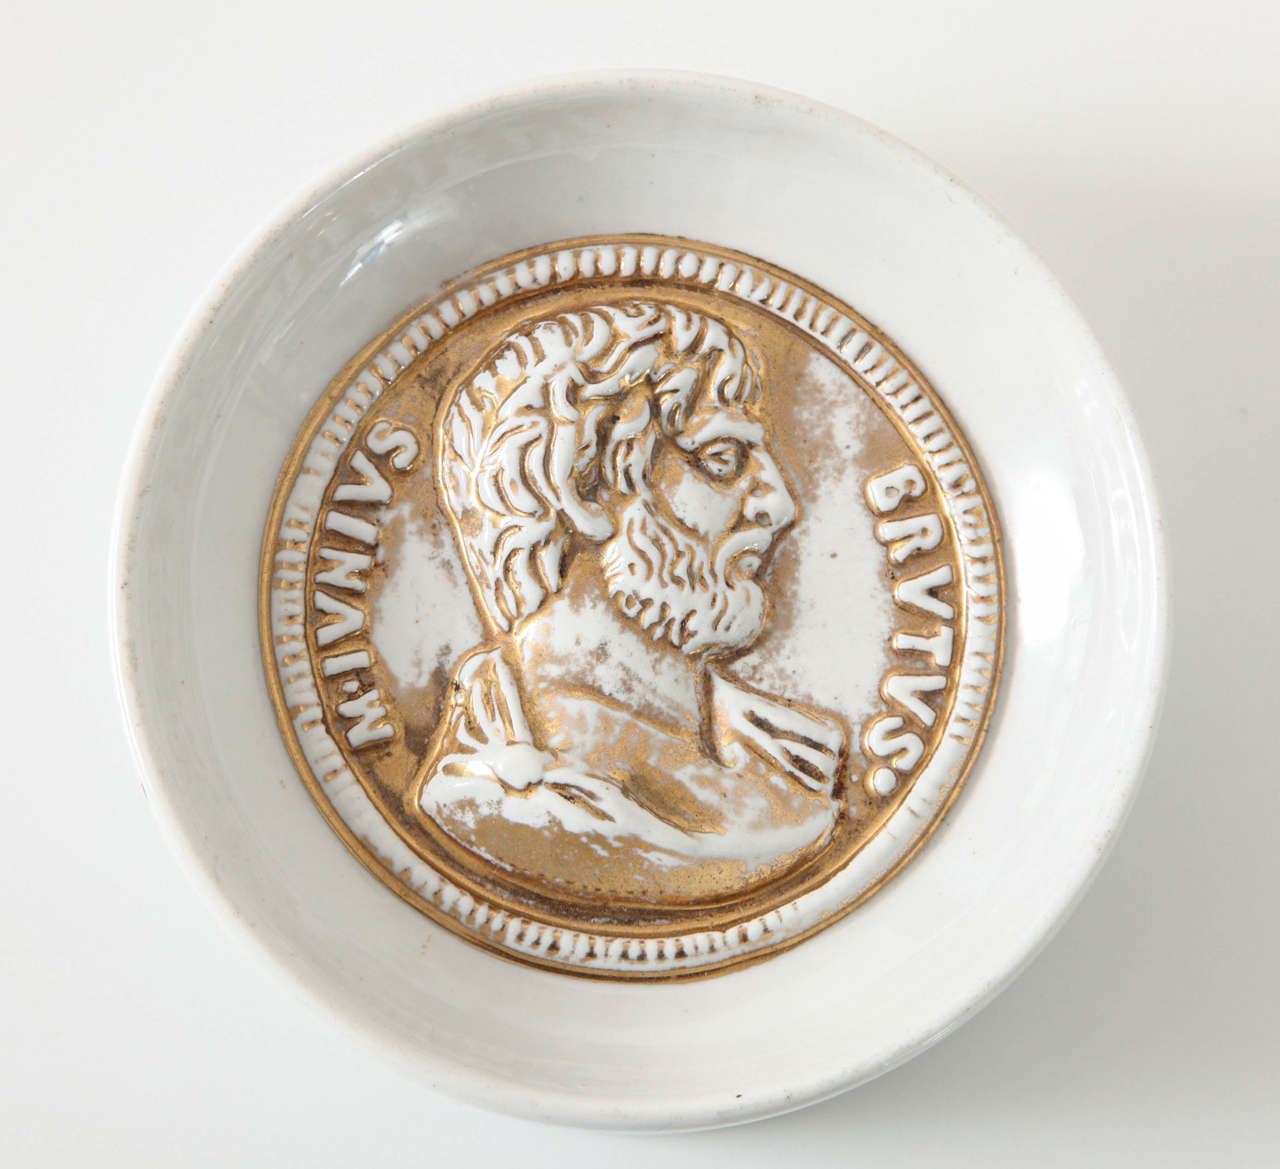 Shallow bowl made to resemble an ancient Roman coin engraved with the head of M. Junius Brutus.